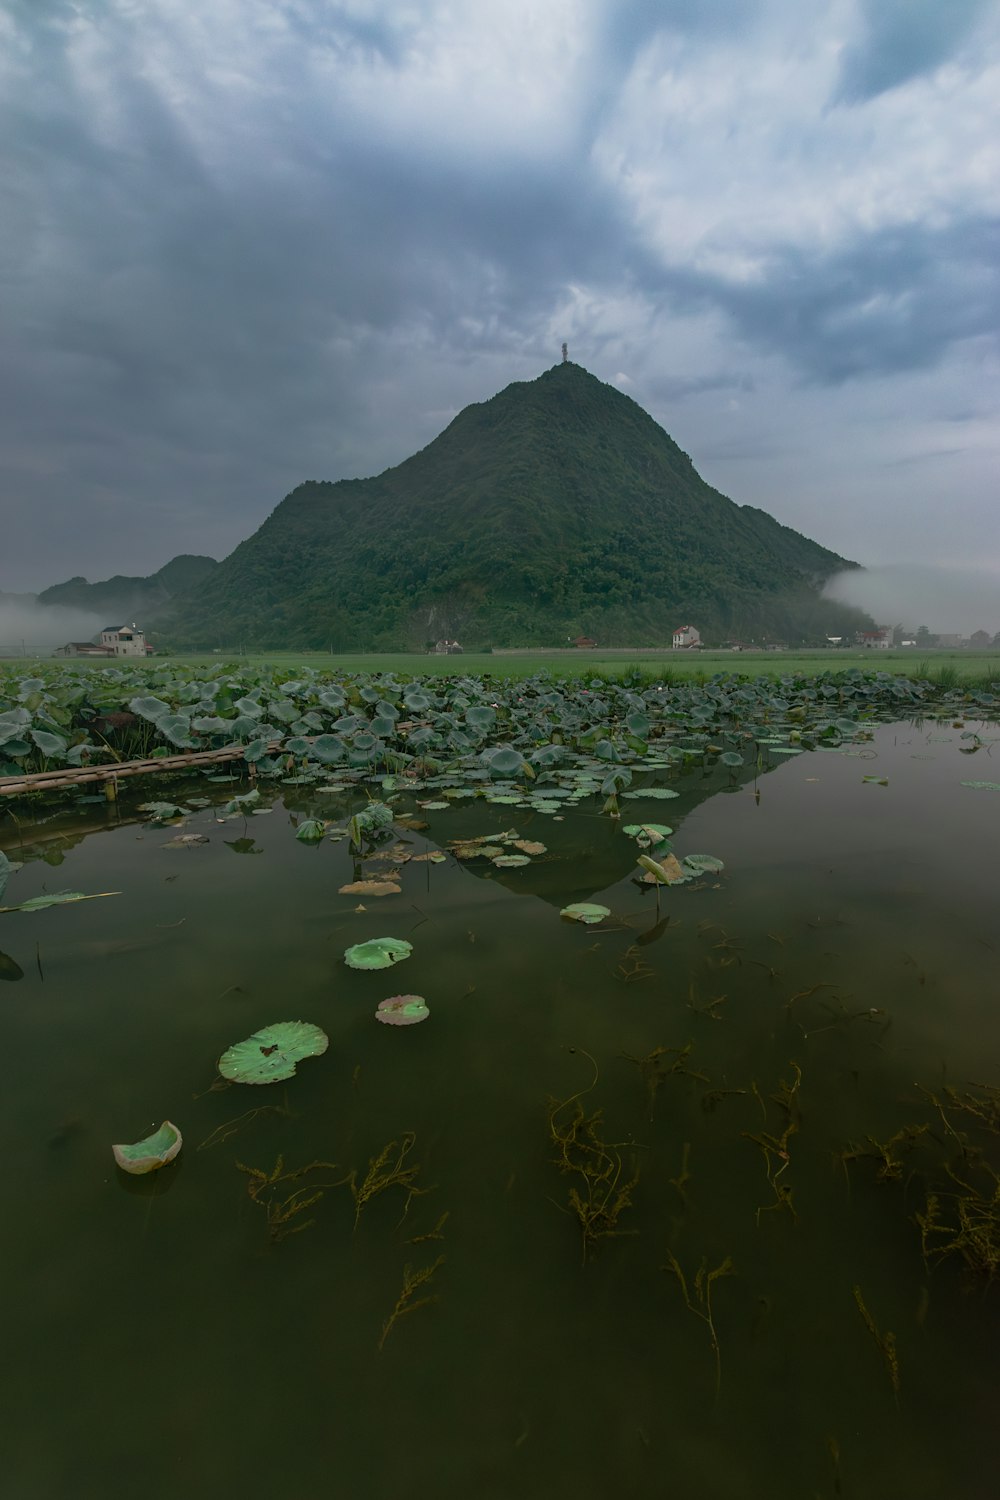 a large body of water with lily pads floating on top of it